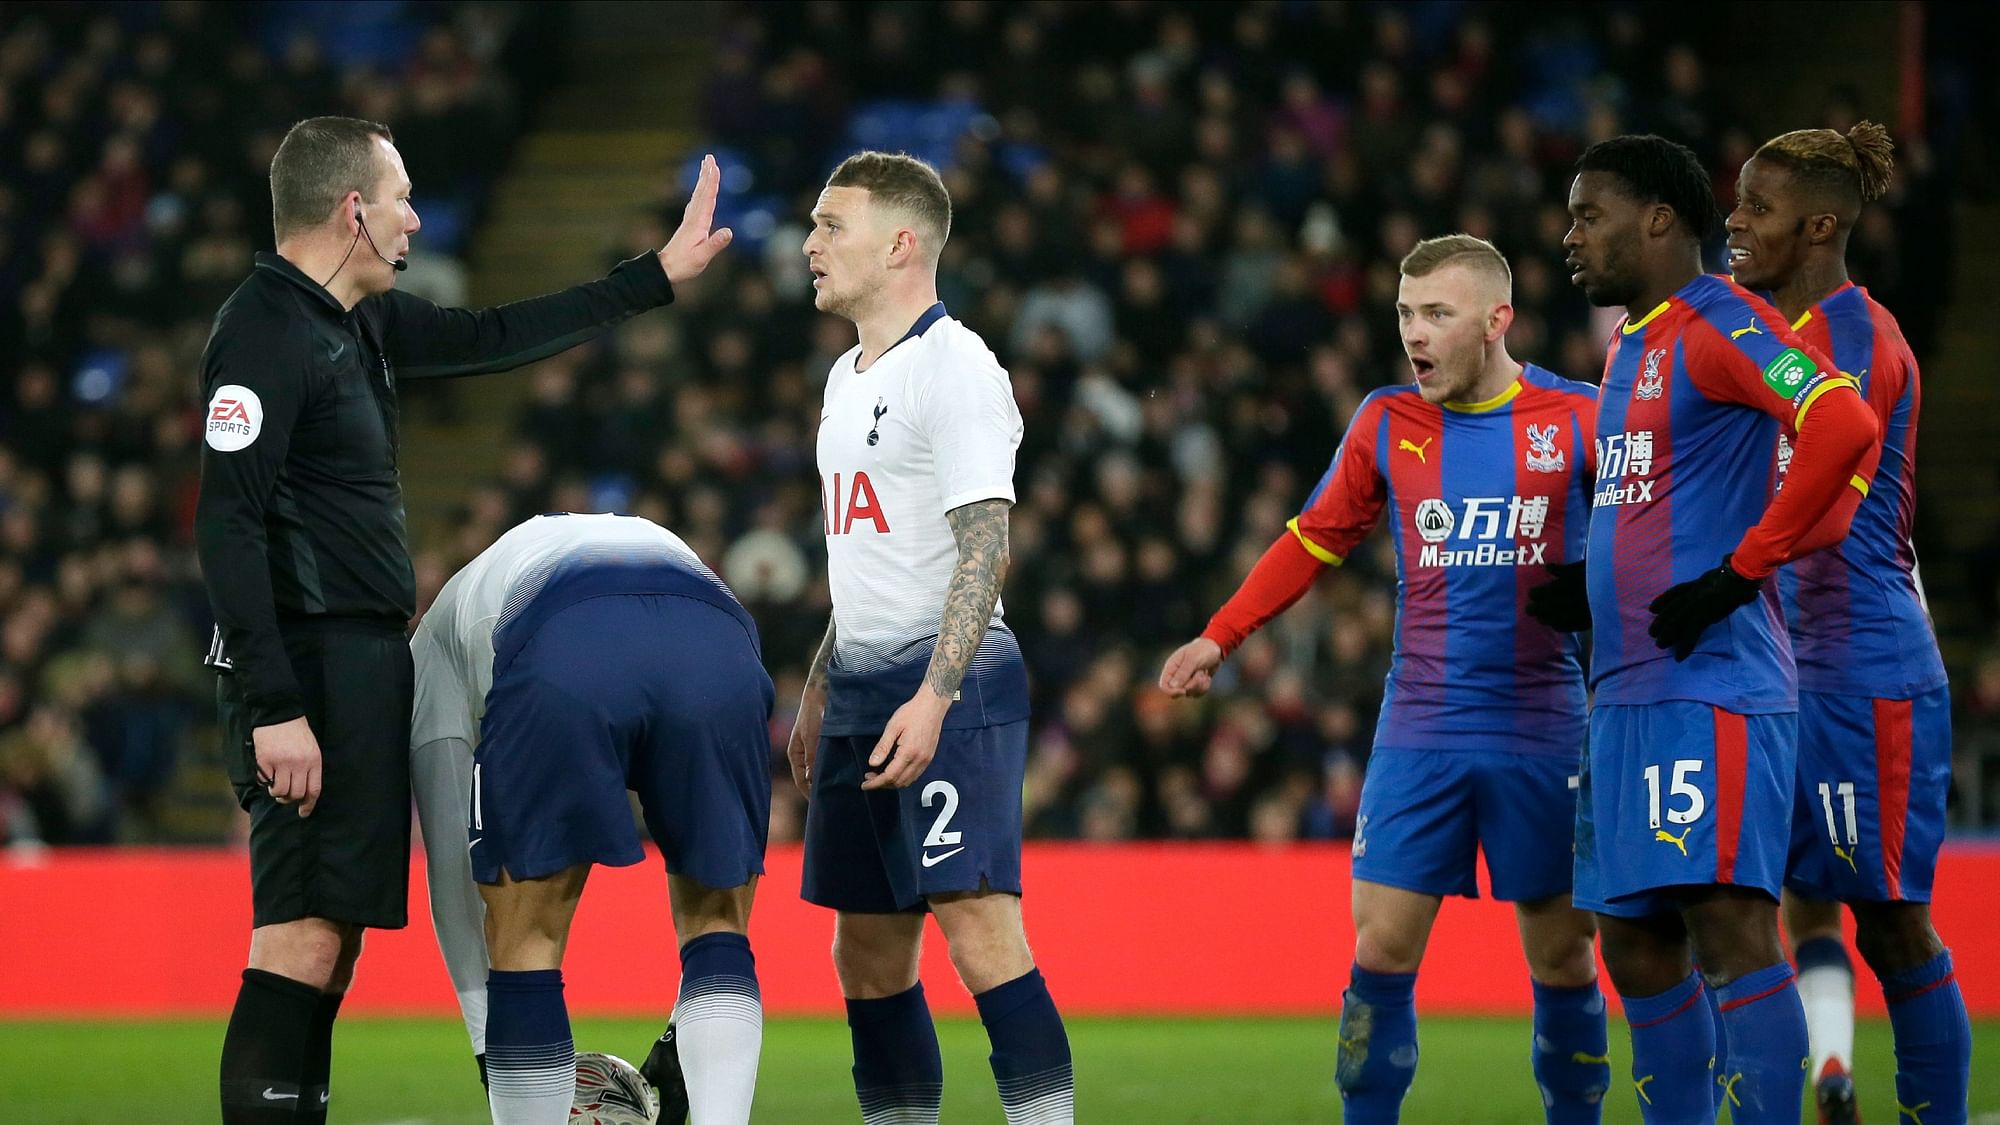 Referee Kevin Friend gestures to Tottenham’s Kieran Trippier during an English FA Cup fourth round soccer match between Crystal Palace and Tottenham Hotspur.